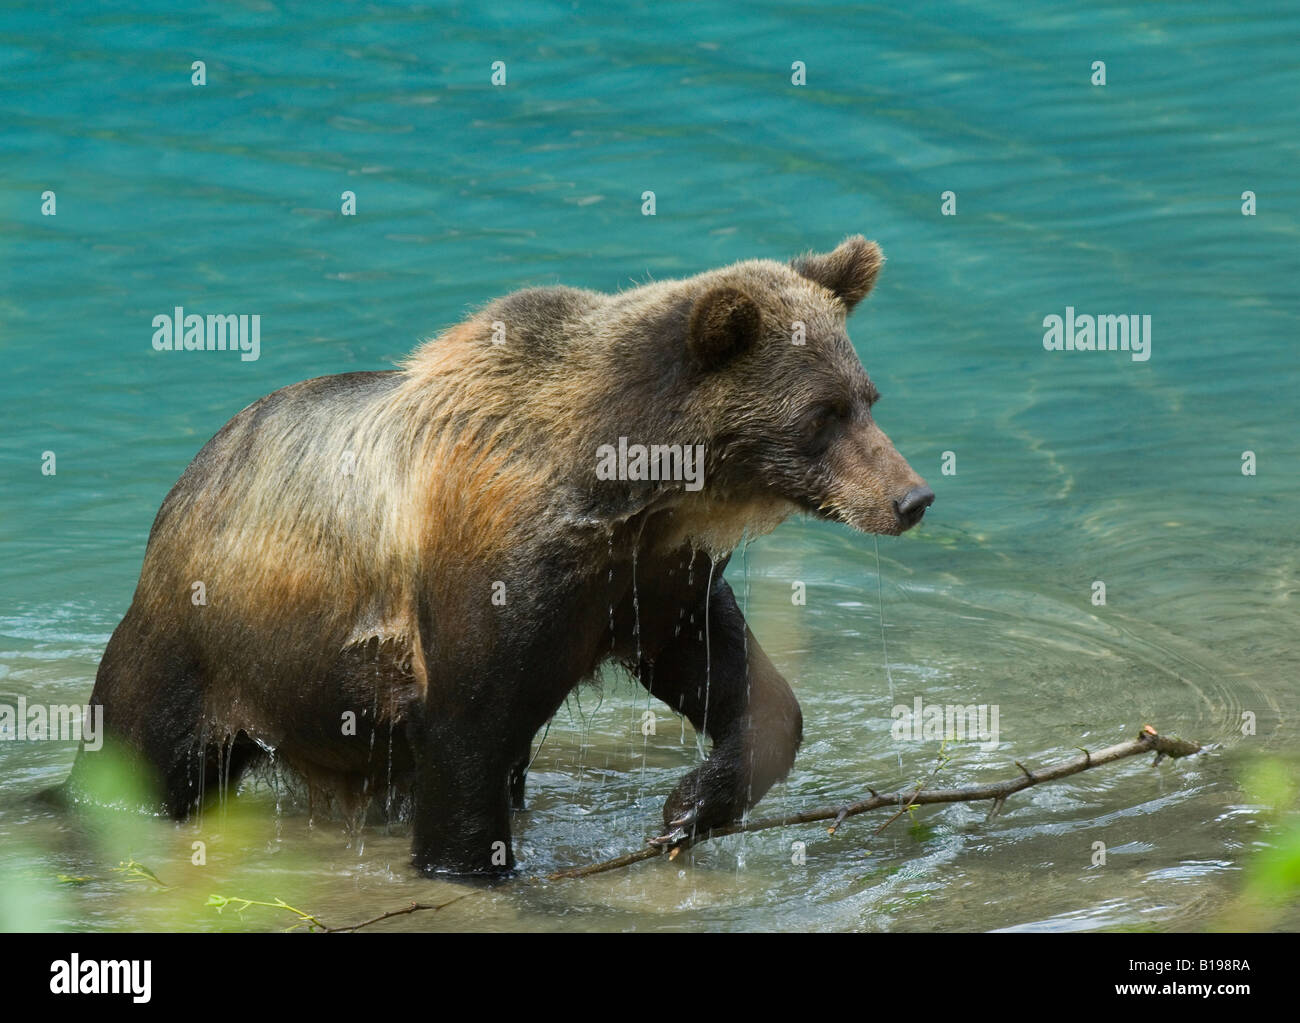 Grizzly Bear (Ursus arctos) Adult emerging from water. Tongass National Forest, Alaska, United States of America. Stock Photo